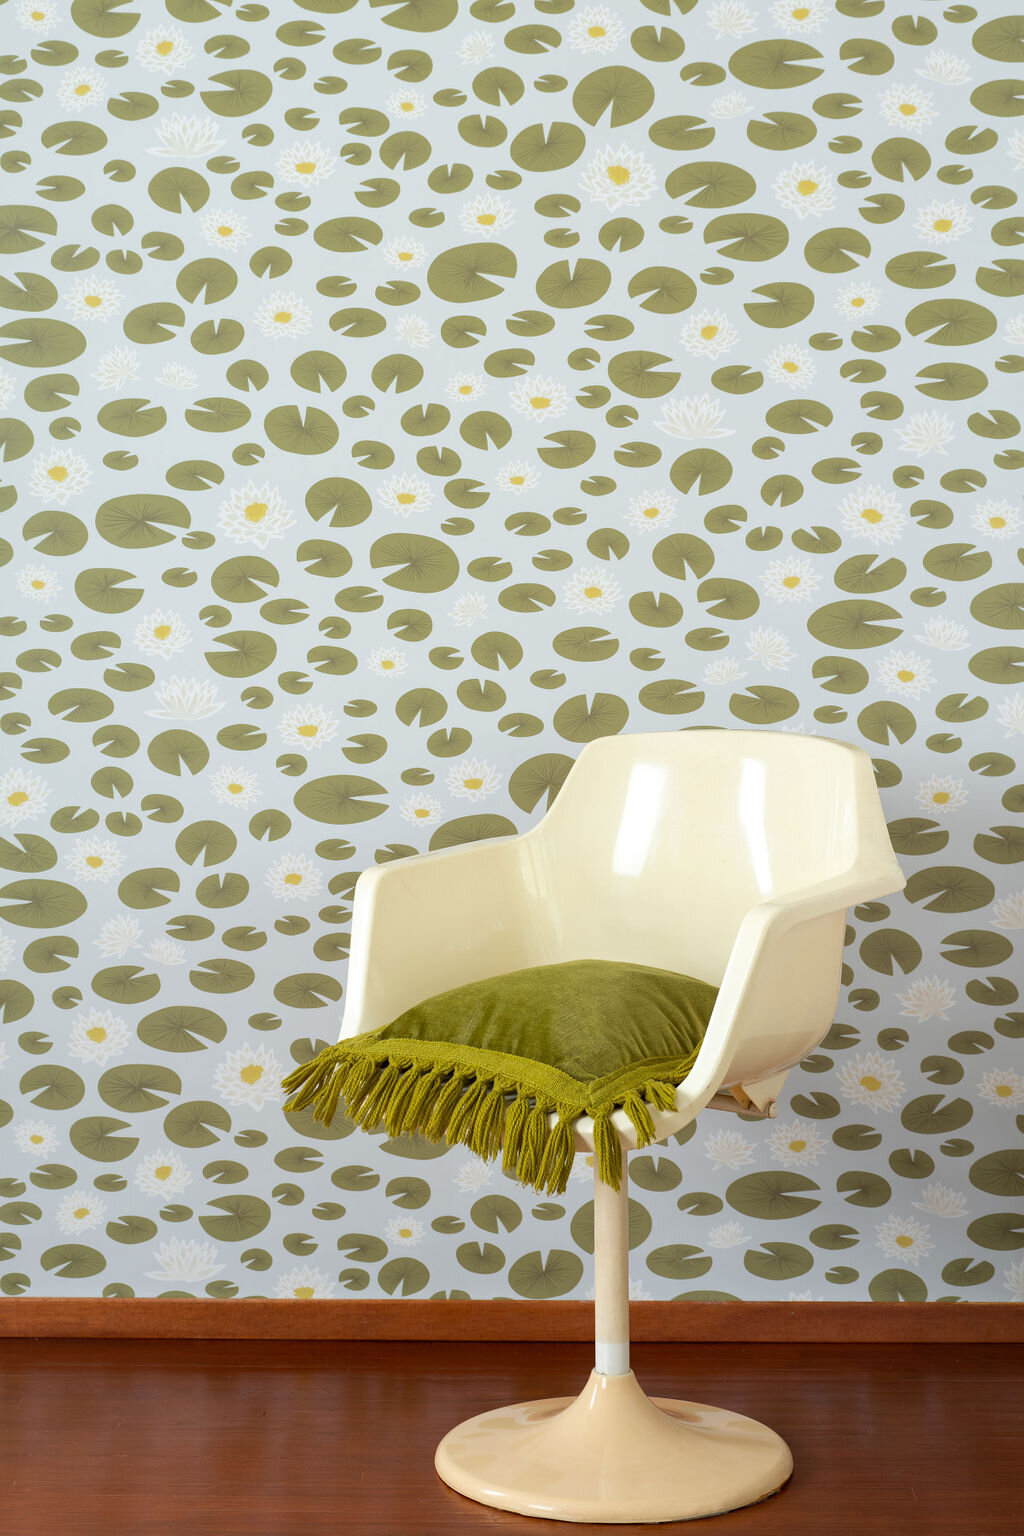 Kate Golding Water Lily (Blue) wallpaper // Modern wallcoverings and interior decor.